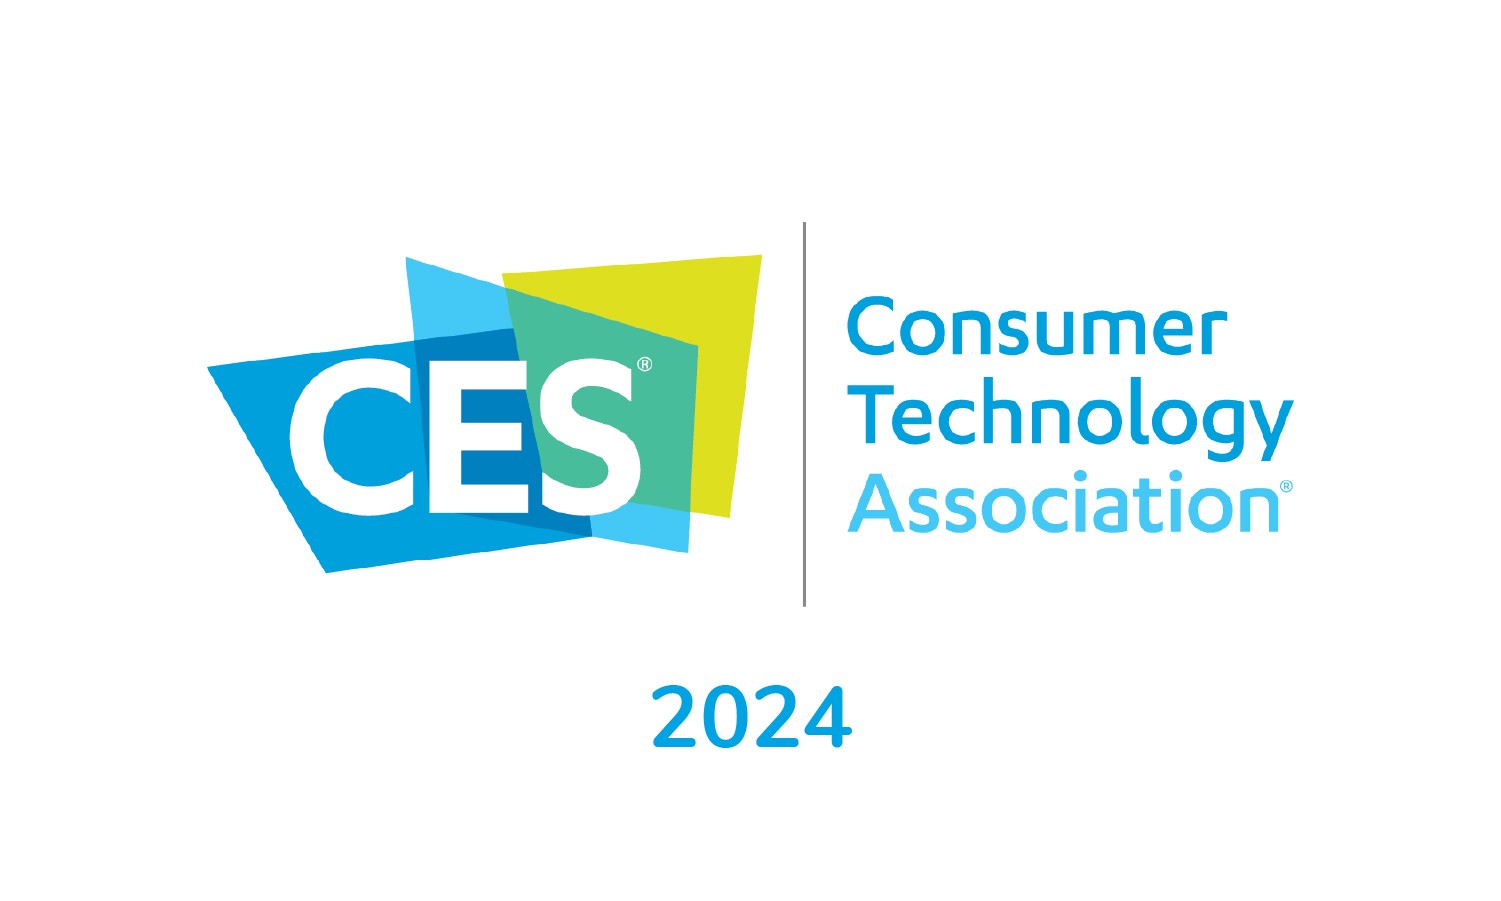 Kaadas at CES 2024: “The Best Way to Create Disruption is Through Collaboration”